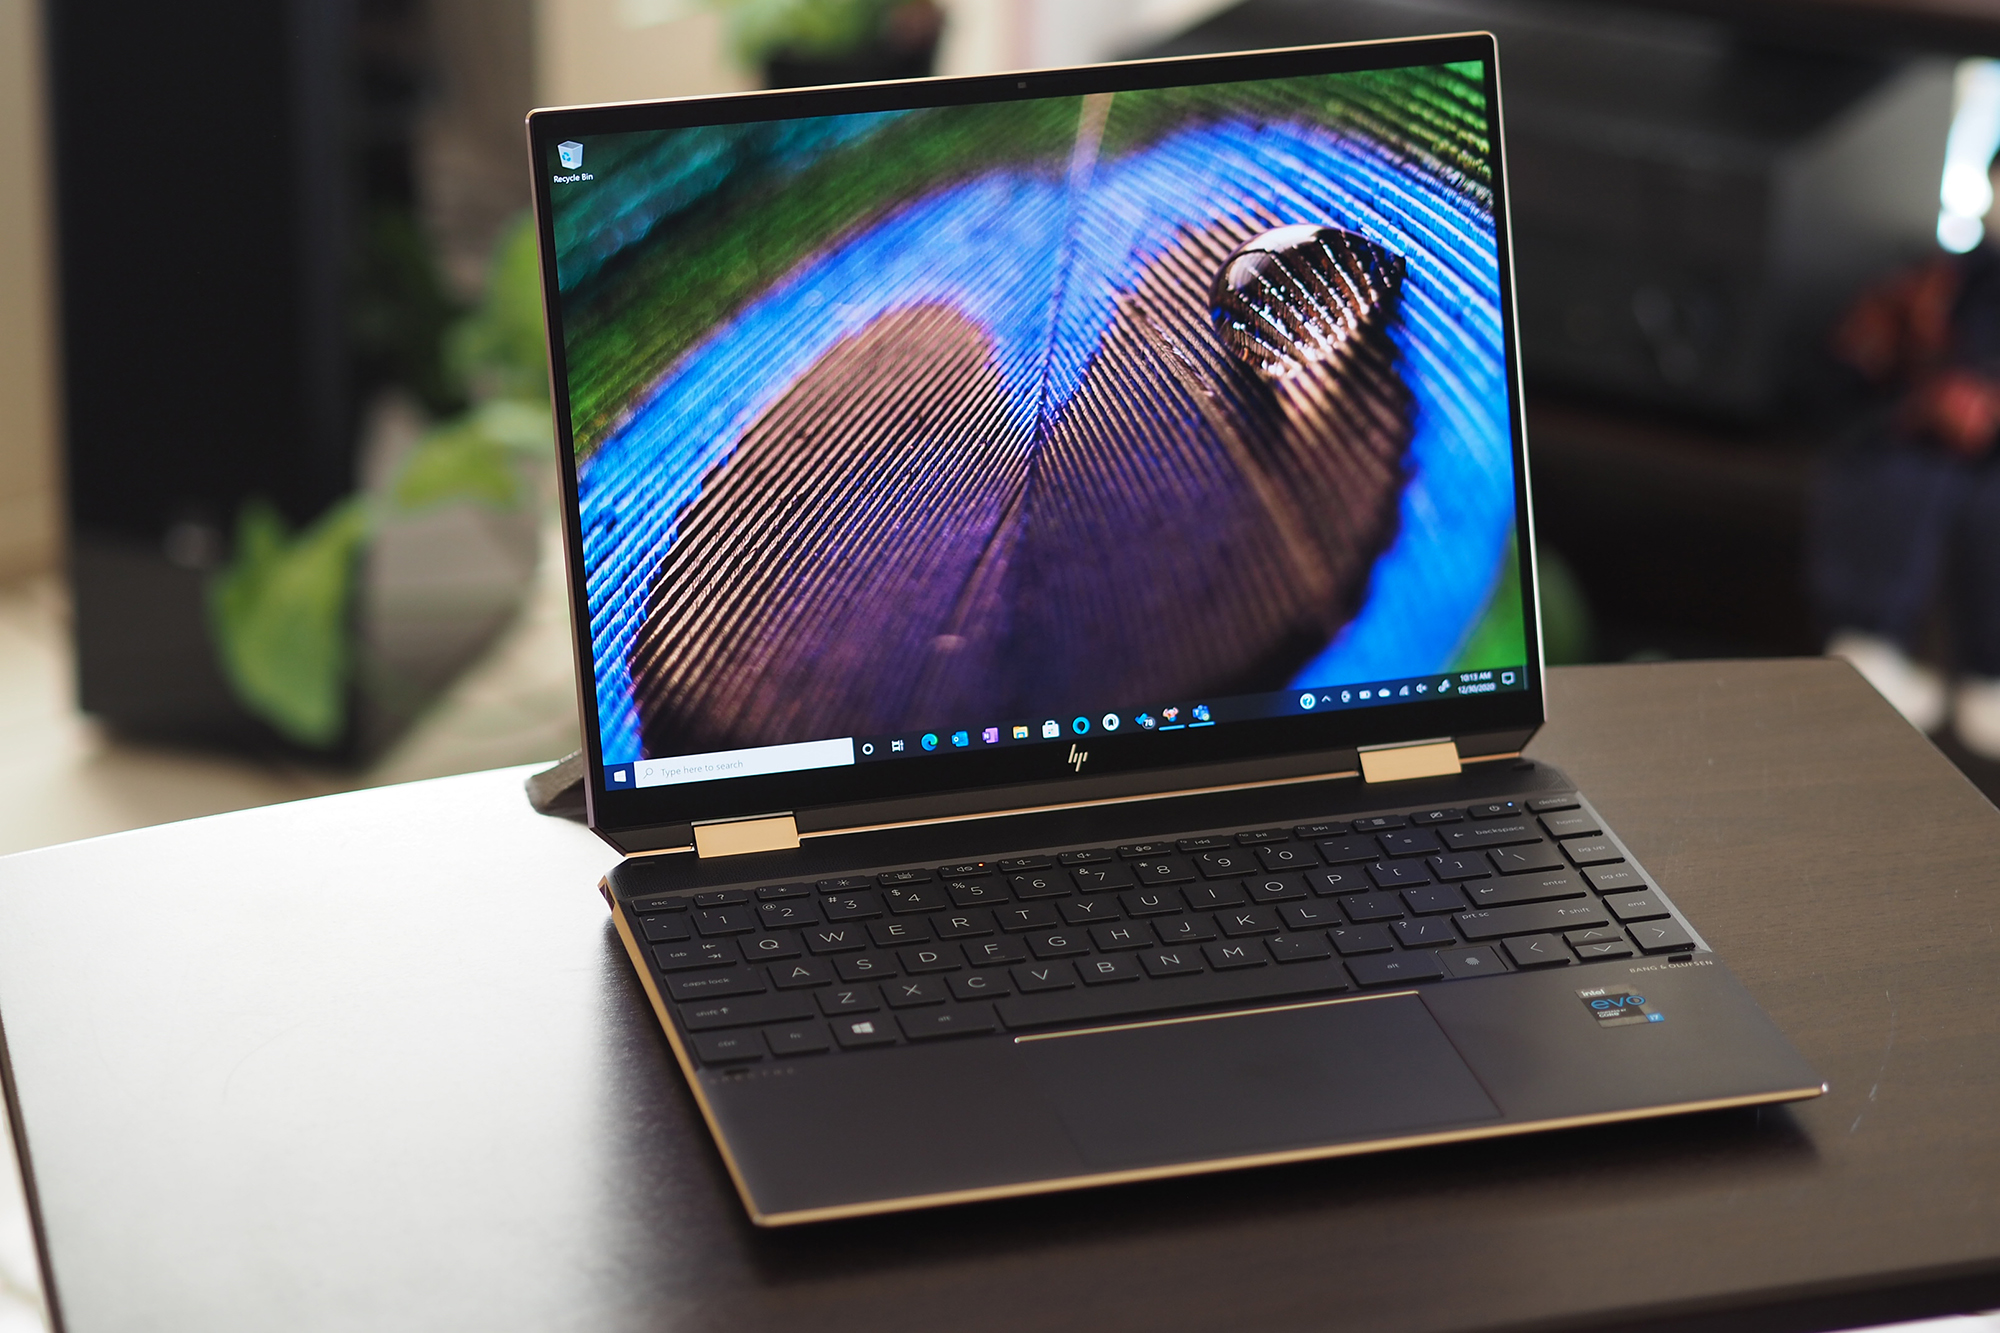 HP Spectre x360 14 review: This 2-in-1 gets it all right - CNET